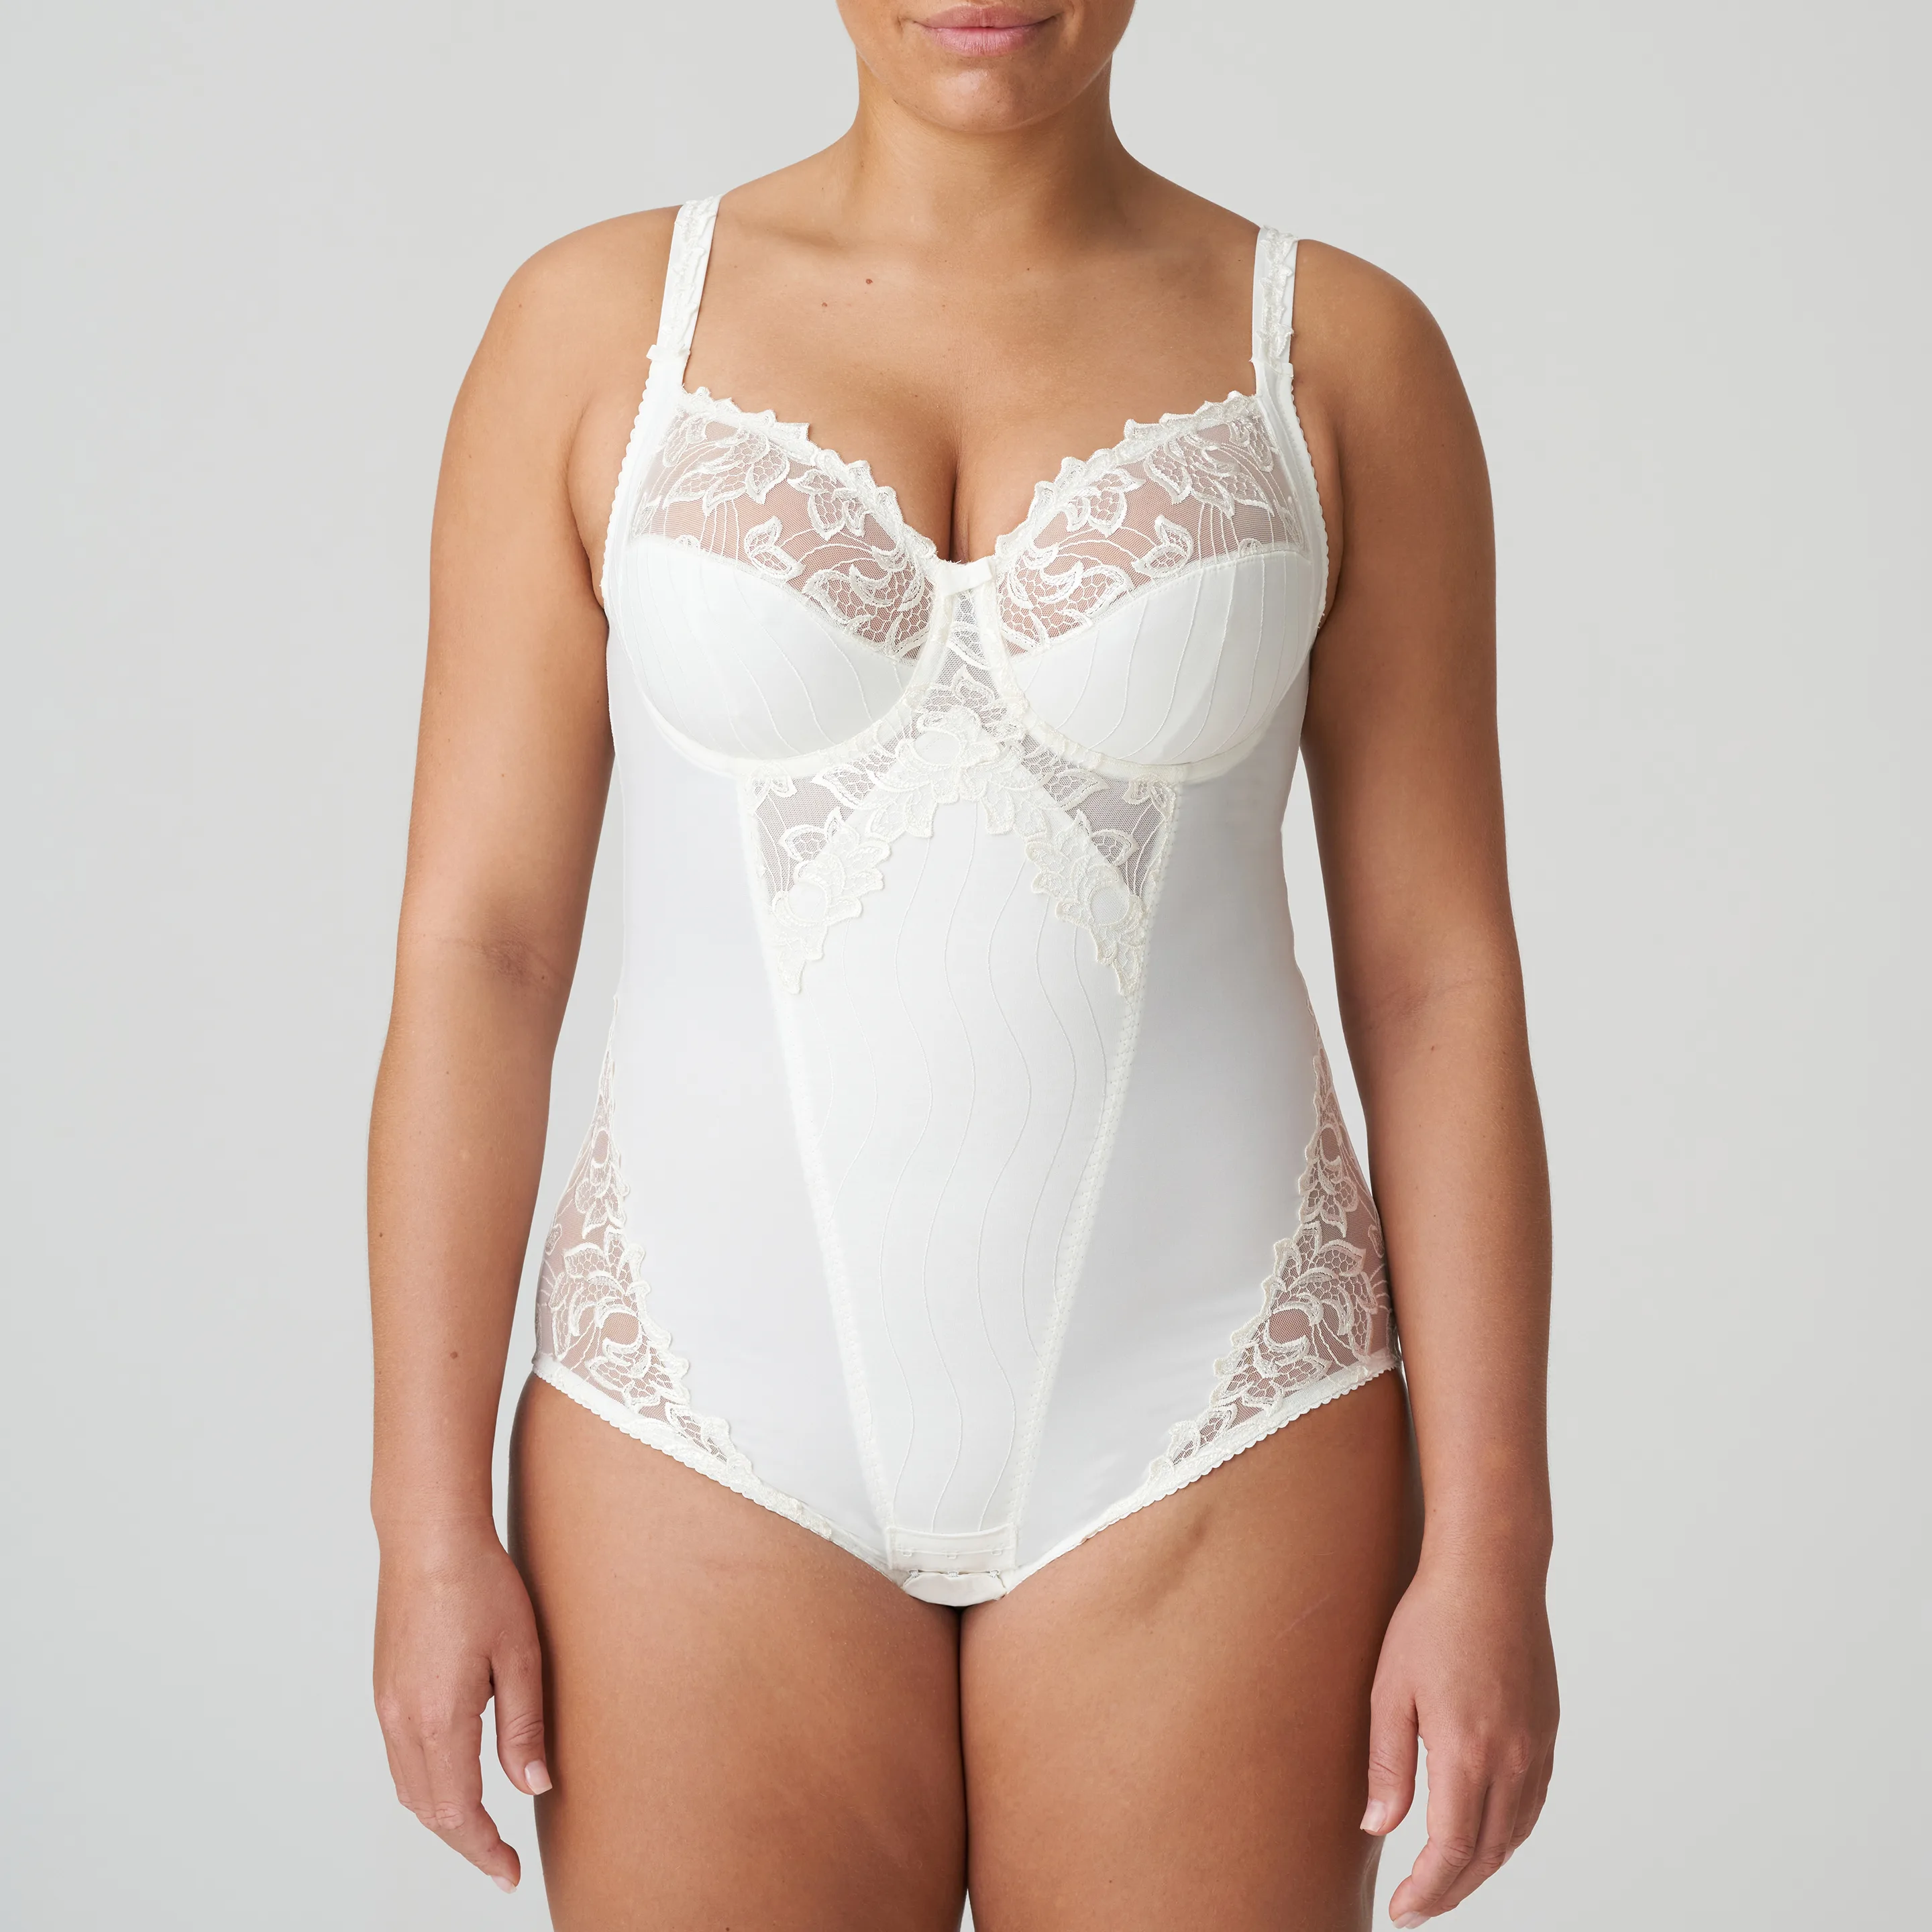 PRIMA DONNA SAMBAL SOFTCUP BODY SUIT – Tops & Bottoms